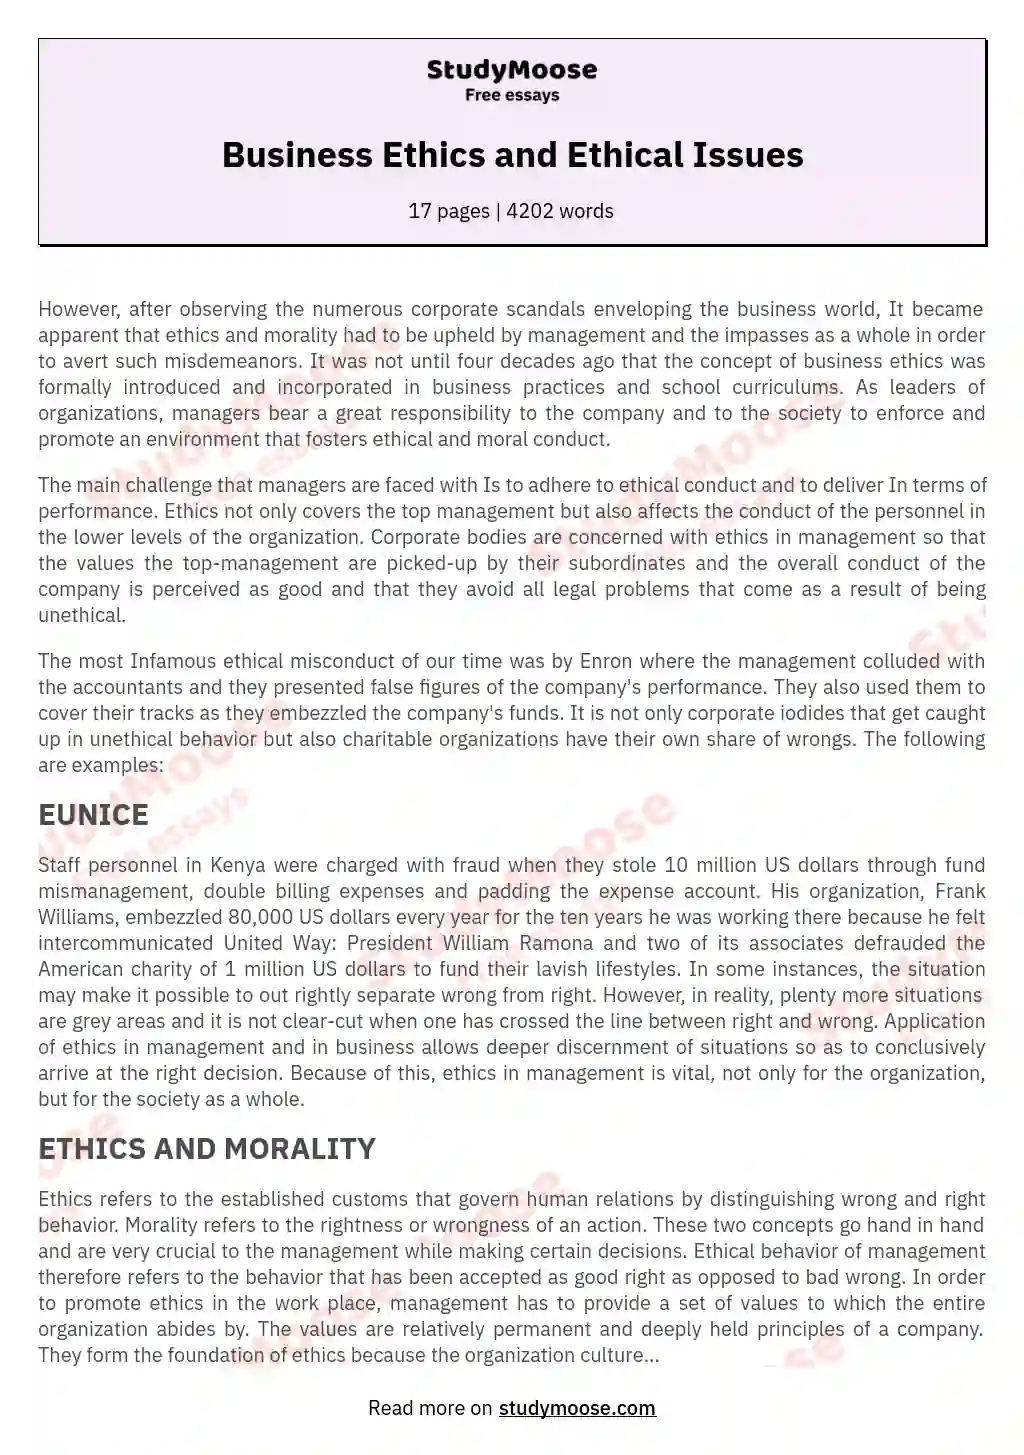 Business Ethics and Ethical Issues essay